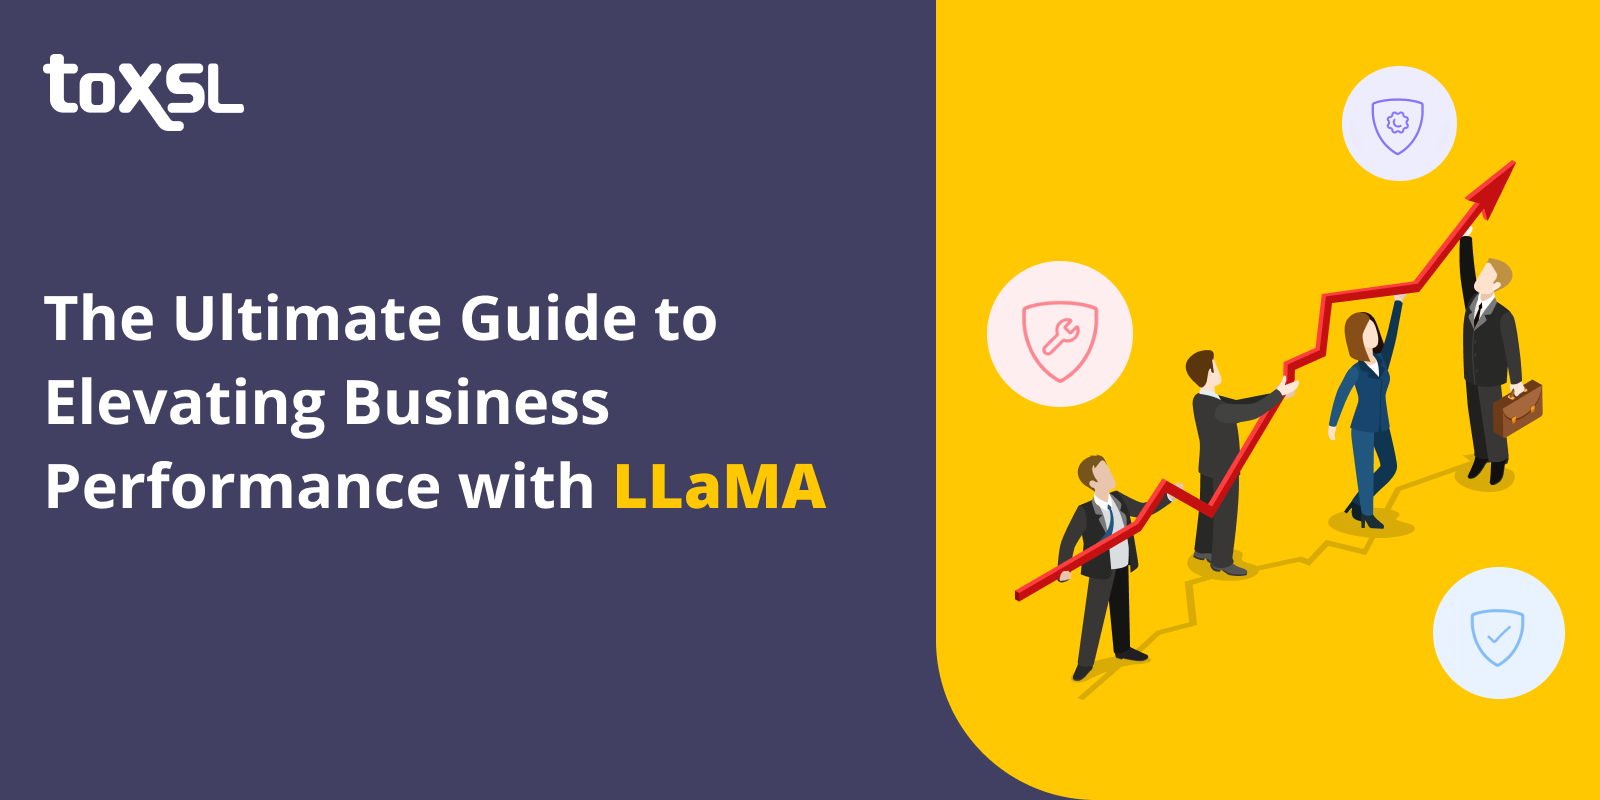 The Ultimate Guide to Elevating Business Performance with LLaMA